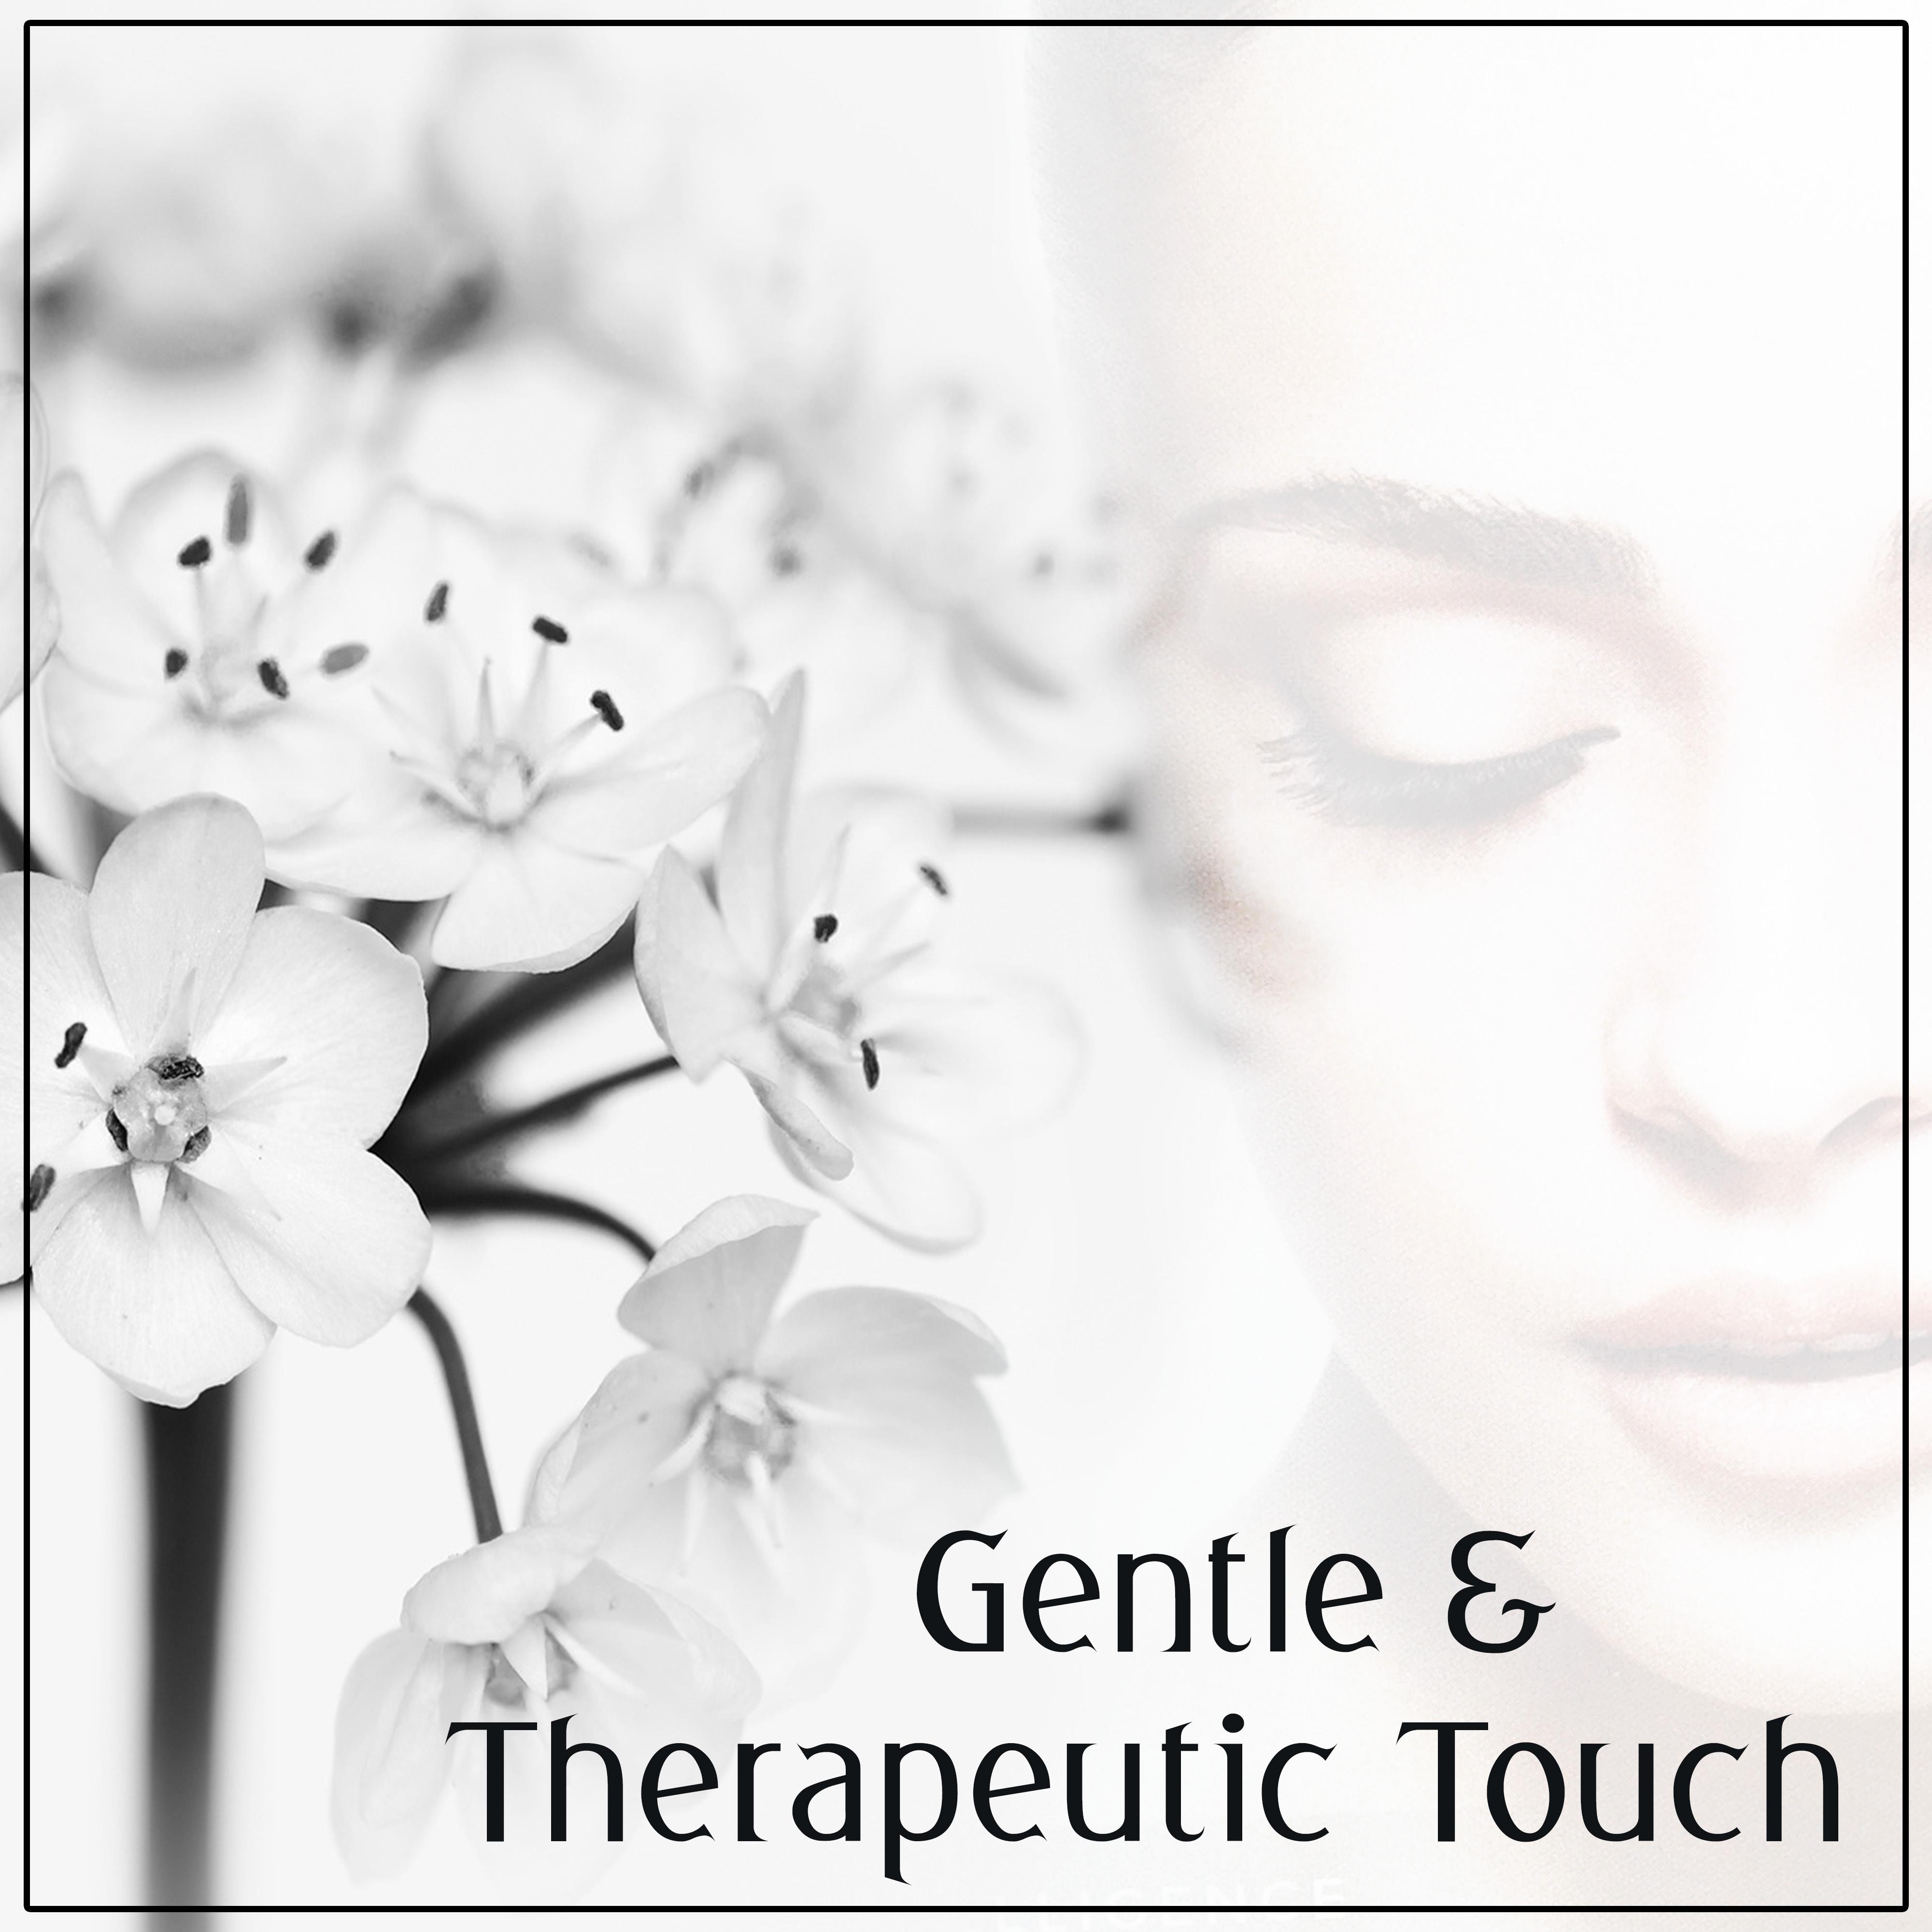 Gentle & Therapeutic Touch - Healing Music for Sensual Massage, Reiki Water Songs, Relaxation, Meditation, Asian Spa